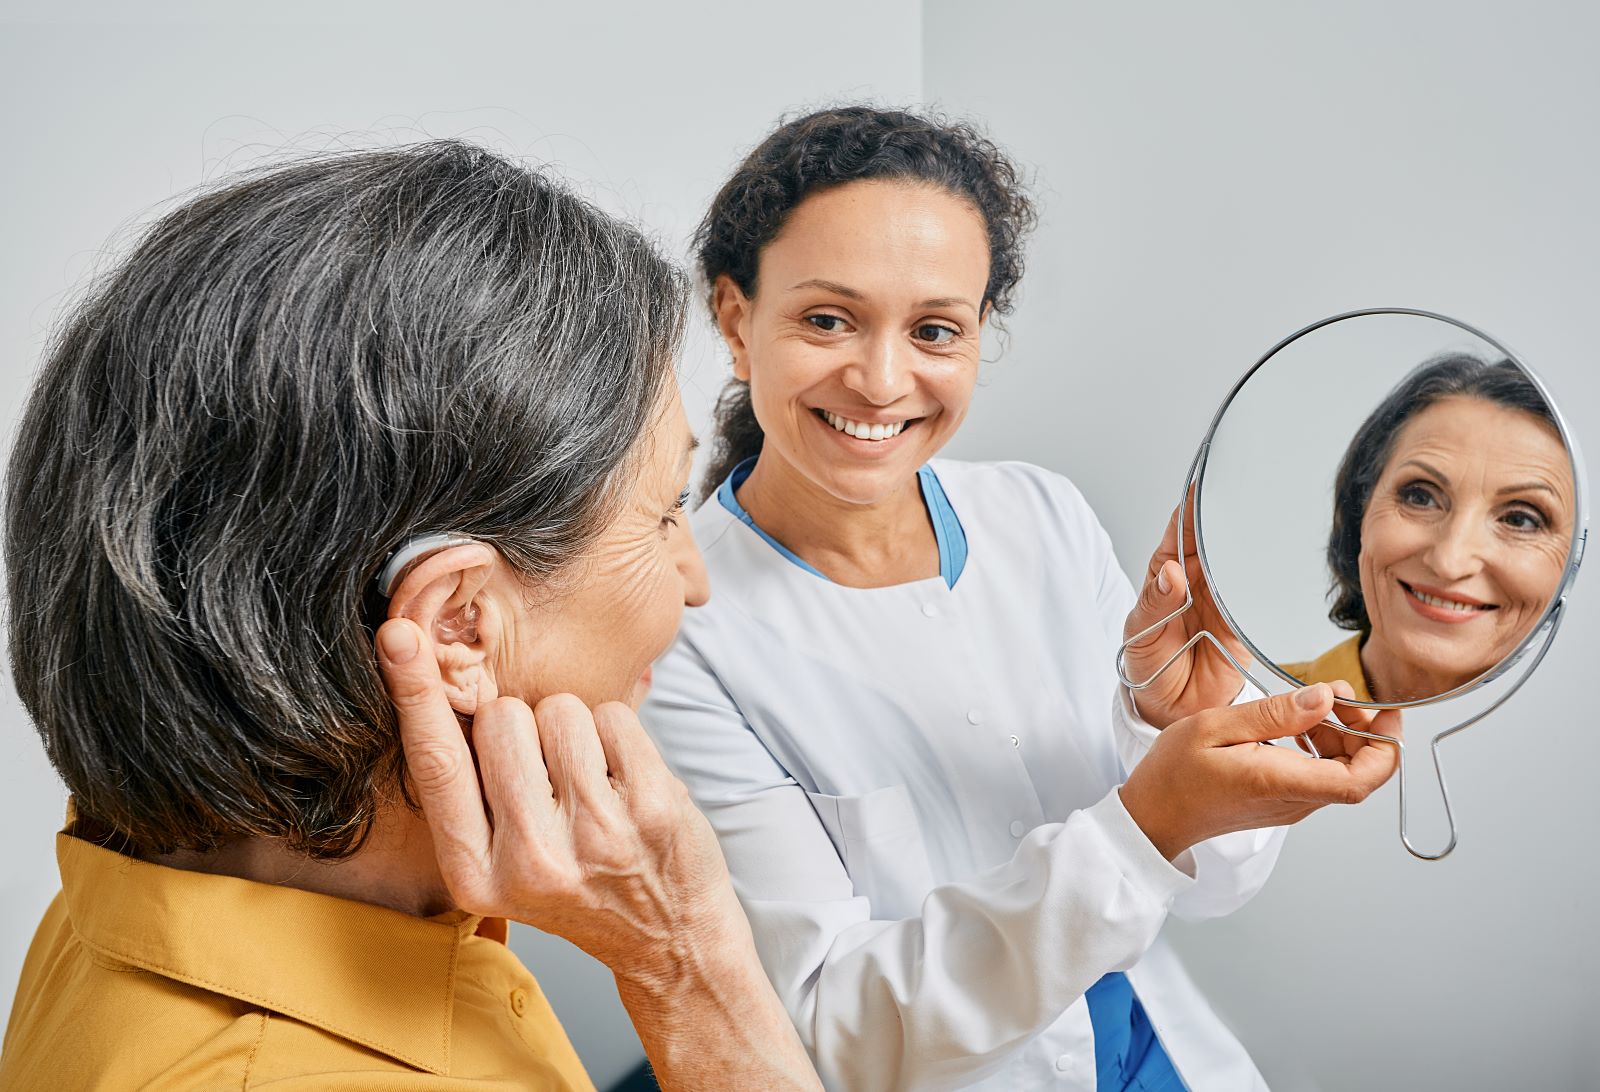 Ready to Buy Hearing Aids? Why Your First Step Should be an Evaluation with an Audiologist